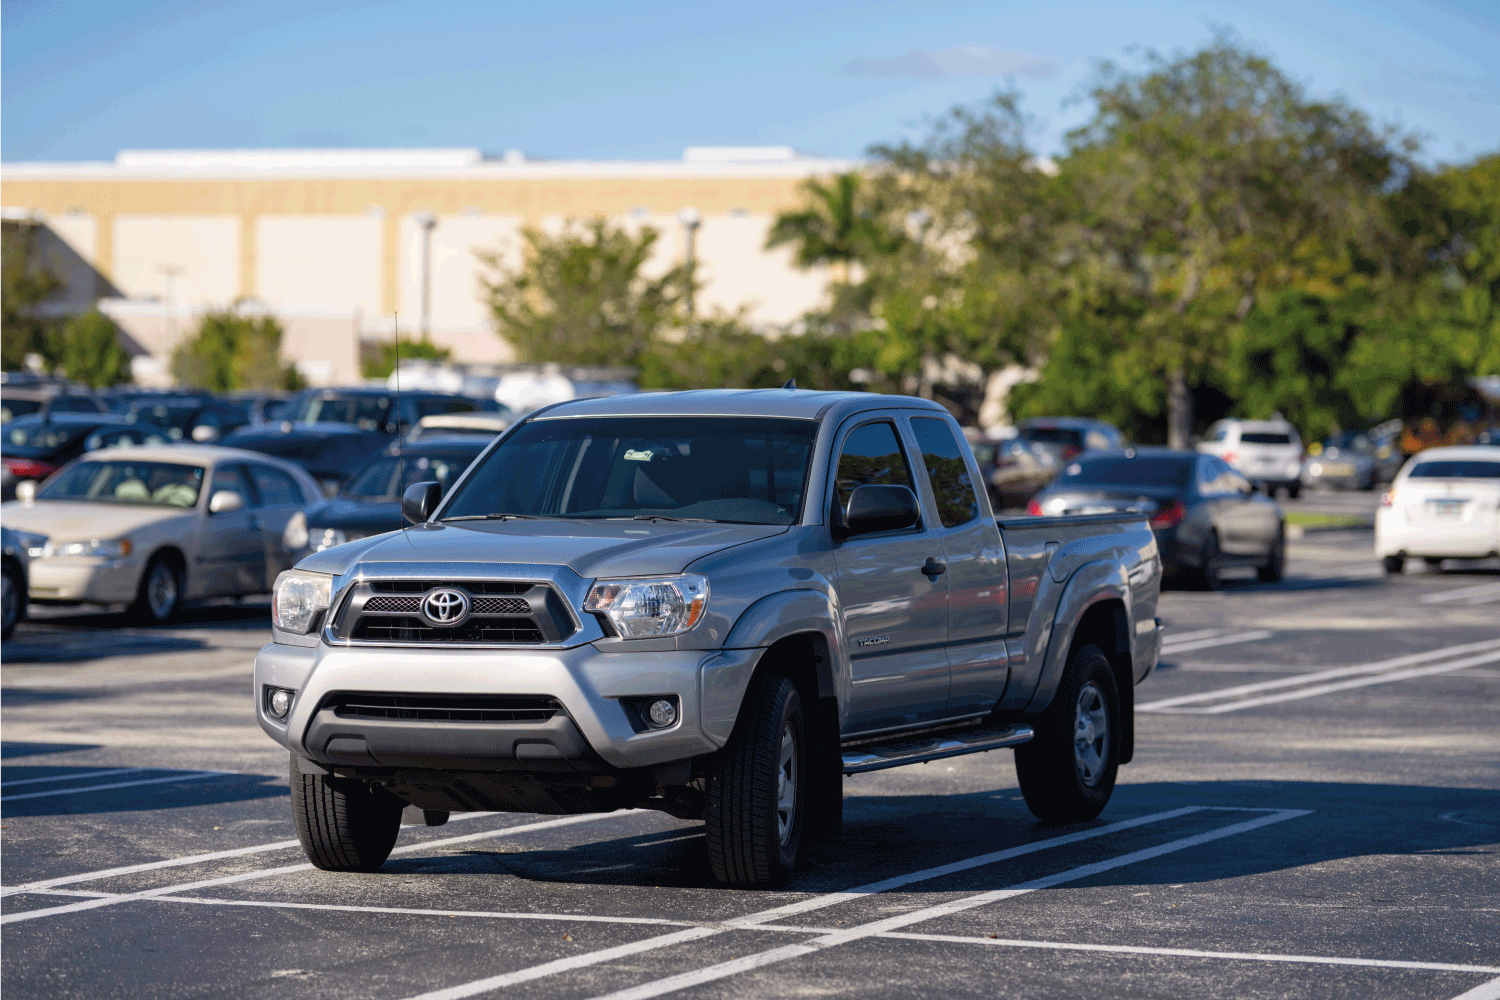 gray Toyota Tundra under the sun in a parking lot